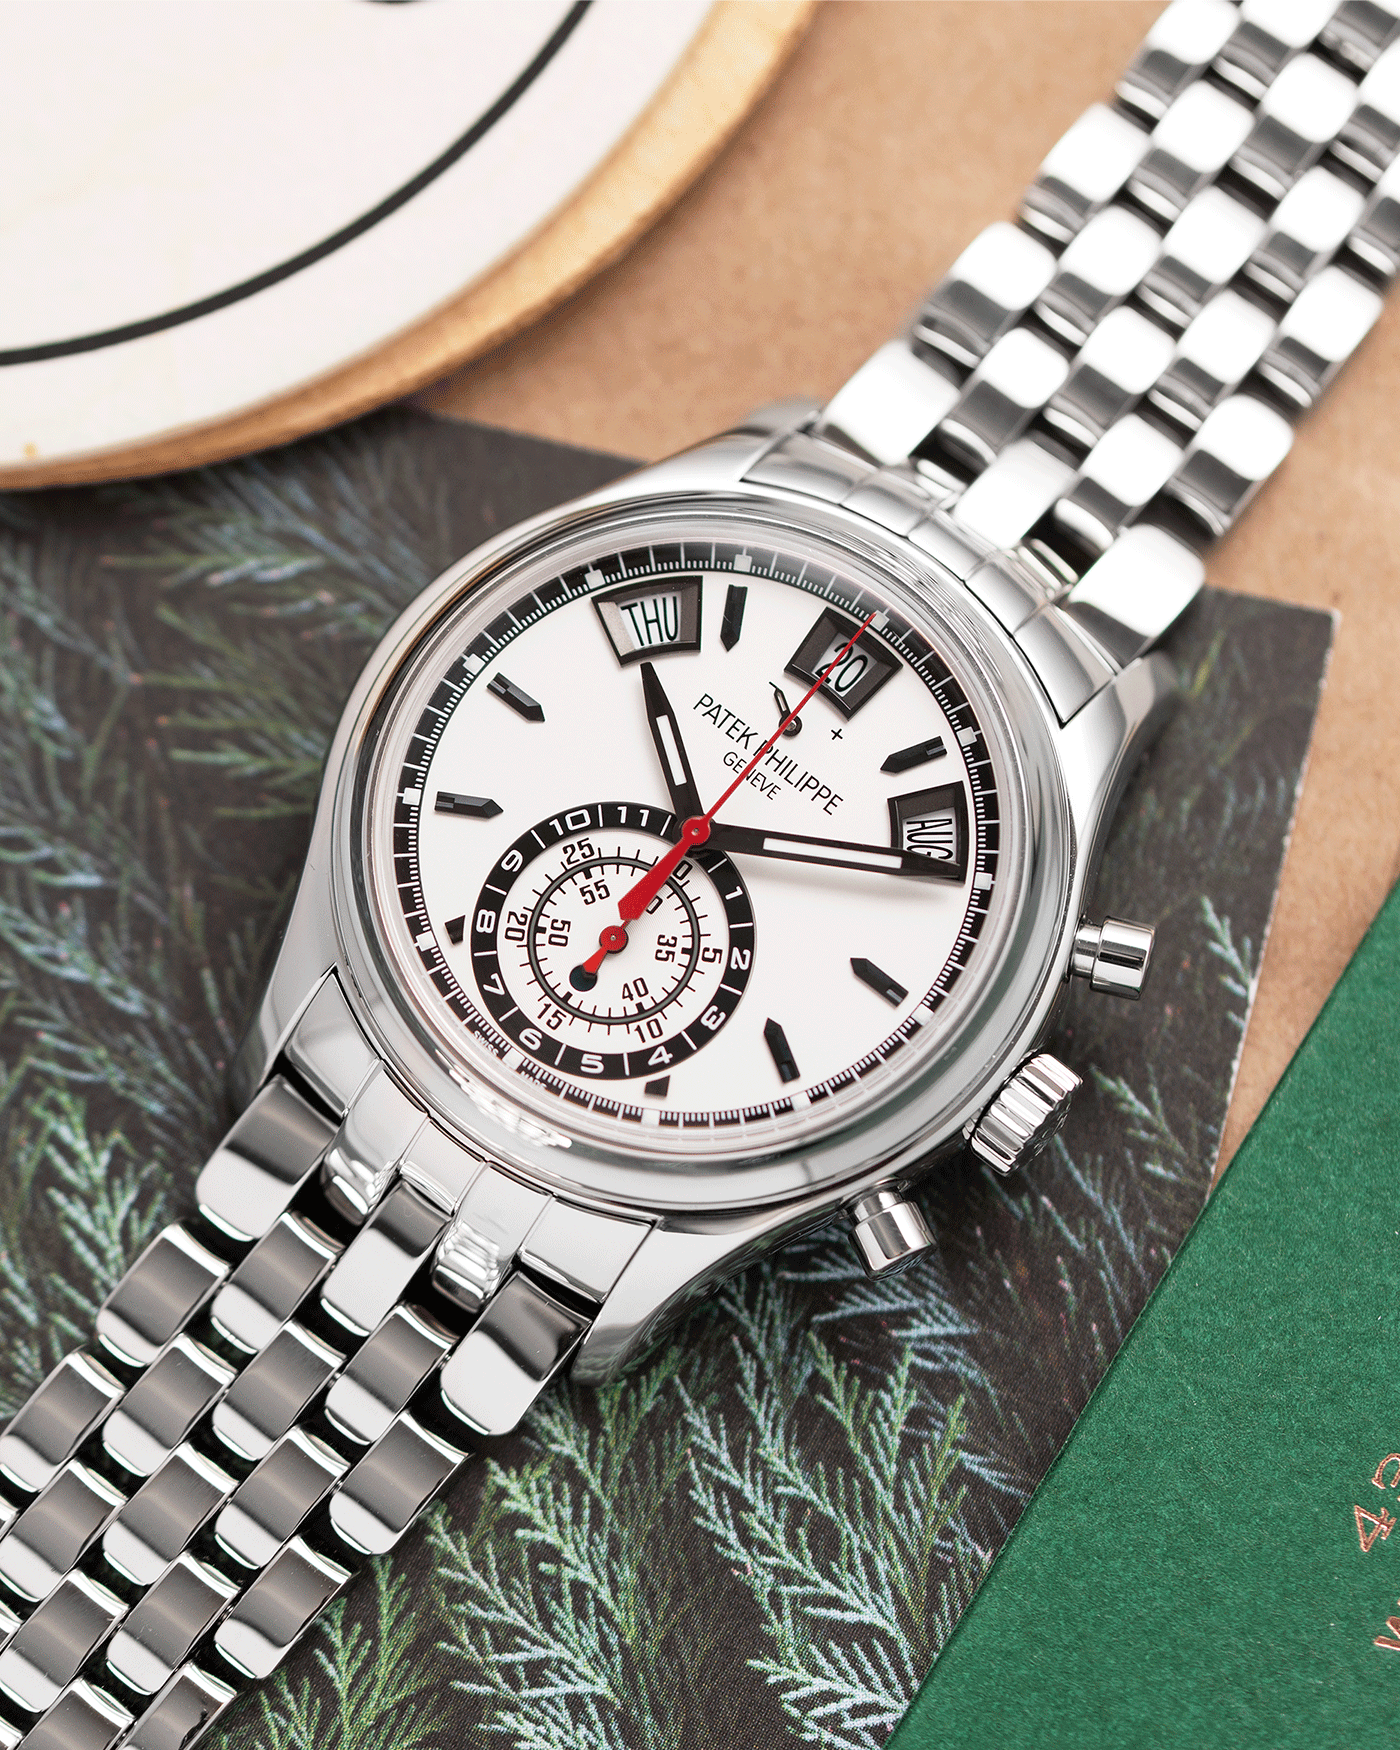 Patek Philippe 5960A Annual Calendar Chronograph Watch | S.Song Timepieces 